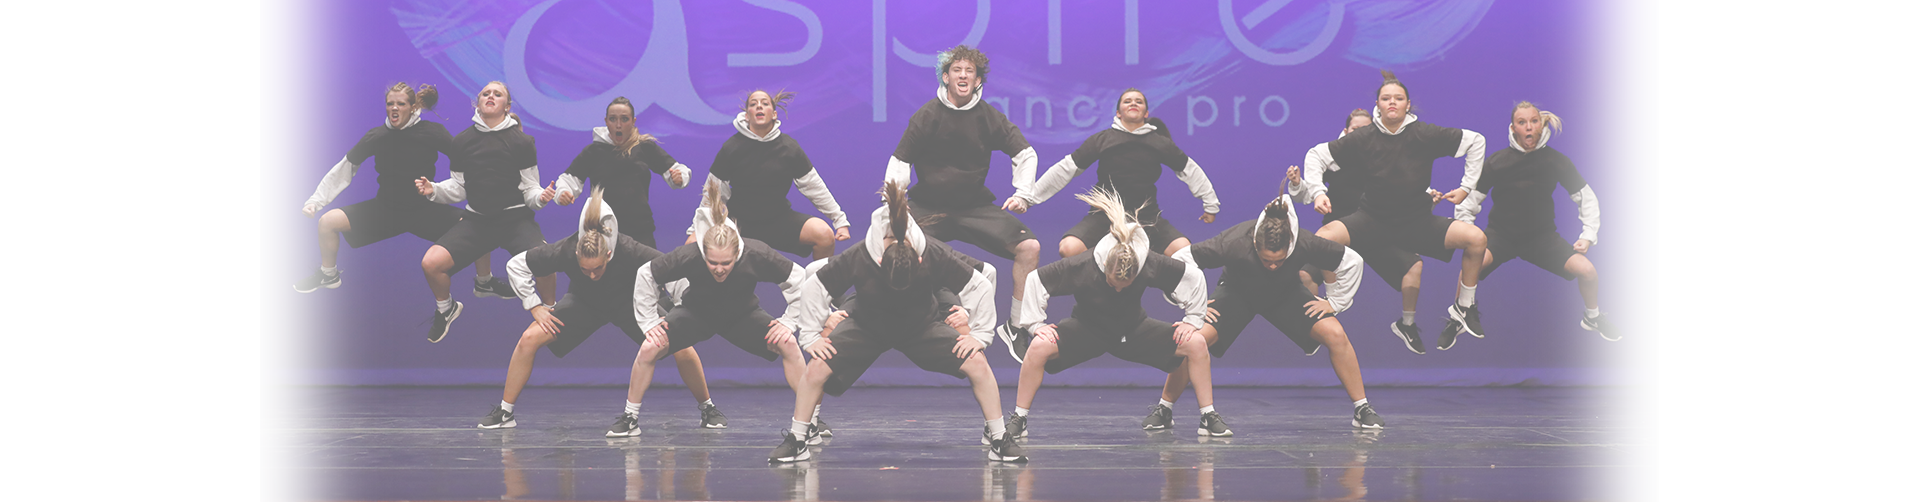 The Dance Project SLC at Aspire Dance Pro Competitions